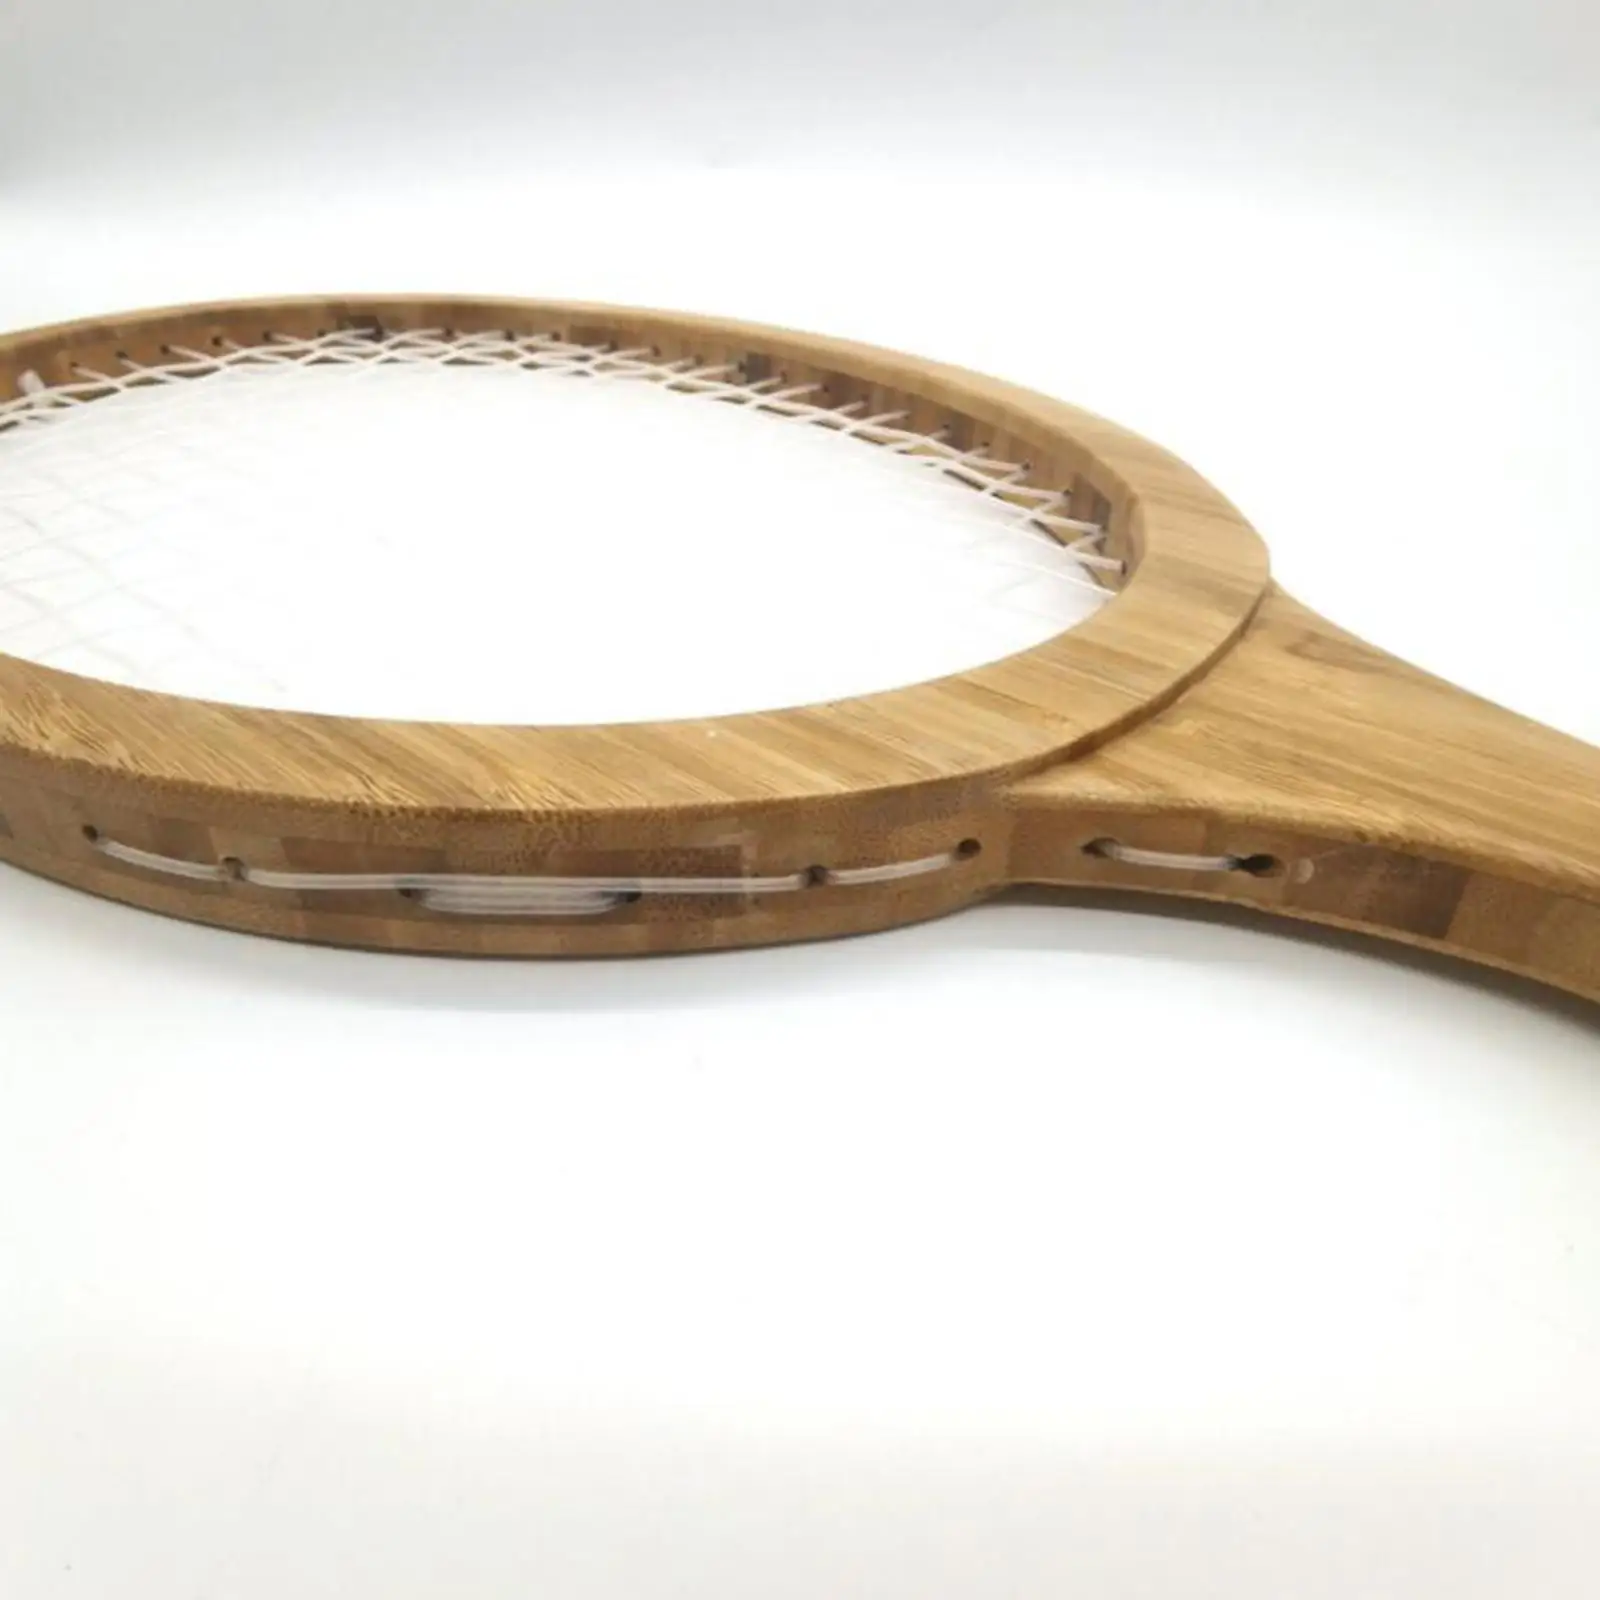 Retro Style Tennis Racquets Family Collectors Gift Wooden Tennis Rackets